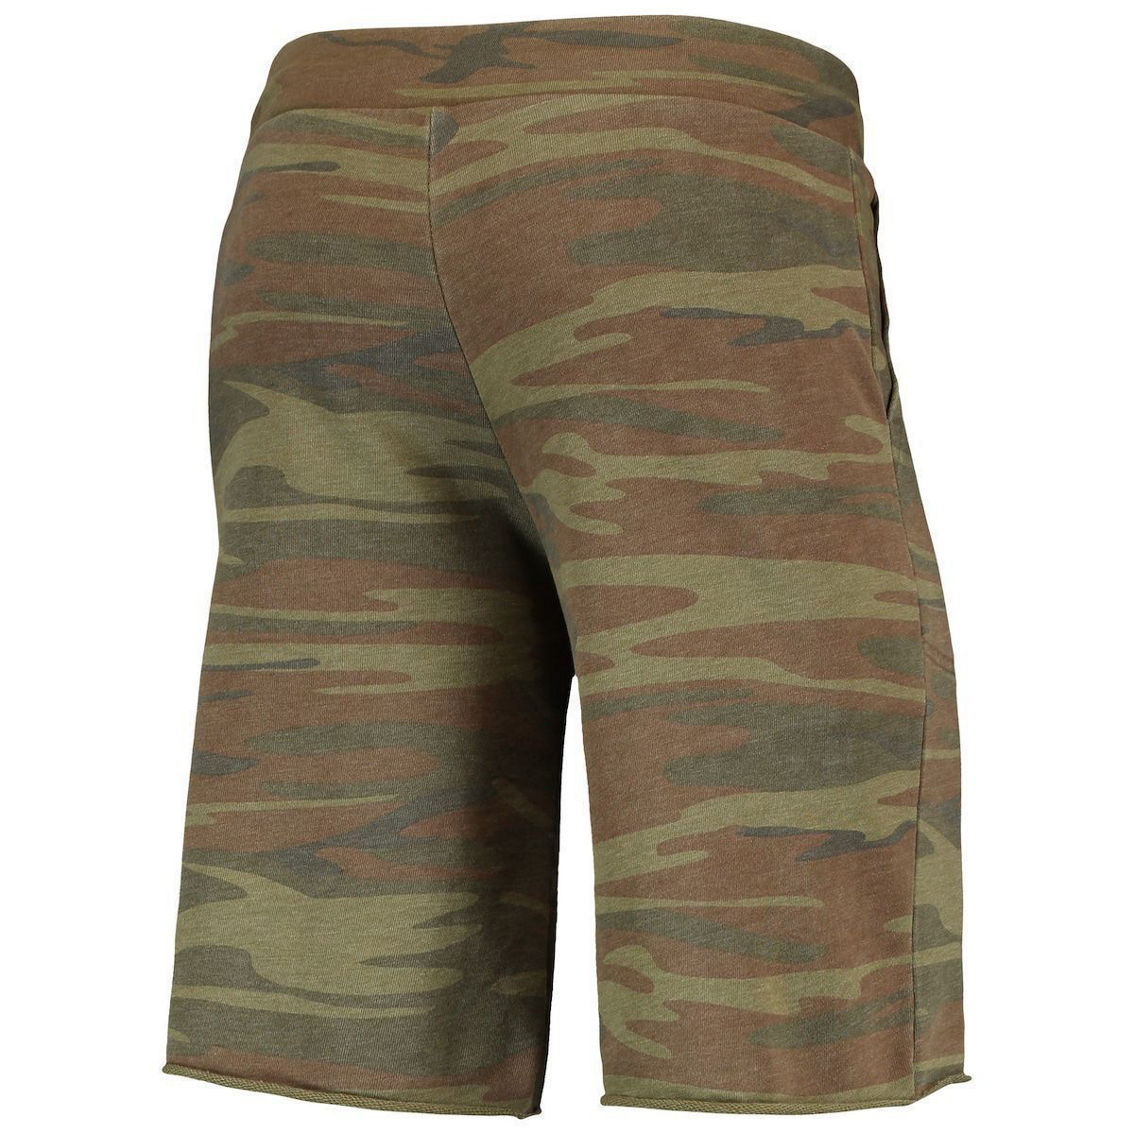 Alternative Apparel Men's Camo Air Force Falcons Victory Lounge Shorts - Image 4 of 4